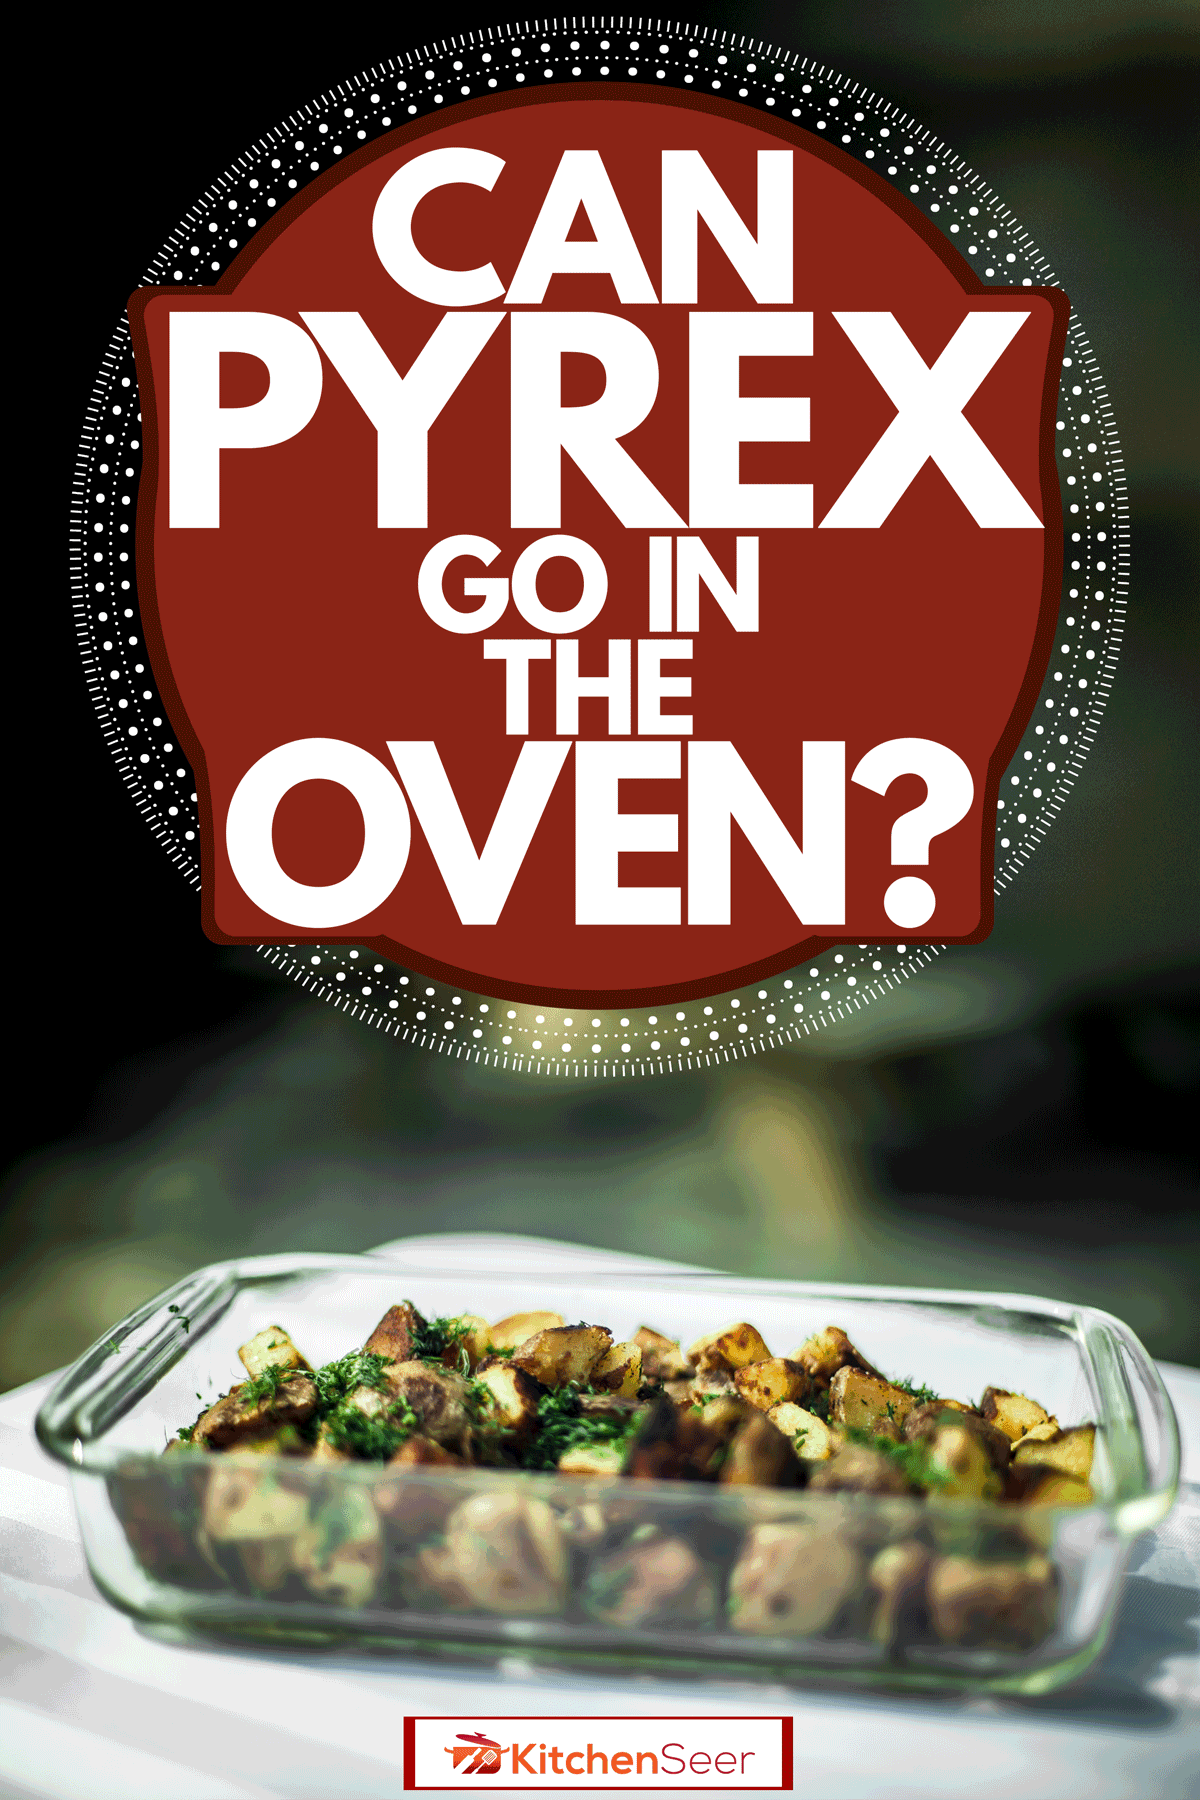 A delicious American cuisine on a pyrex glass casserole placed on a table outside to cool, Can Pyrex Go In The Oven?